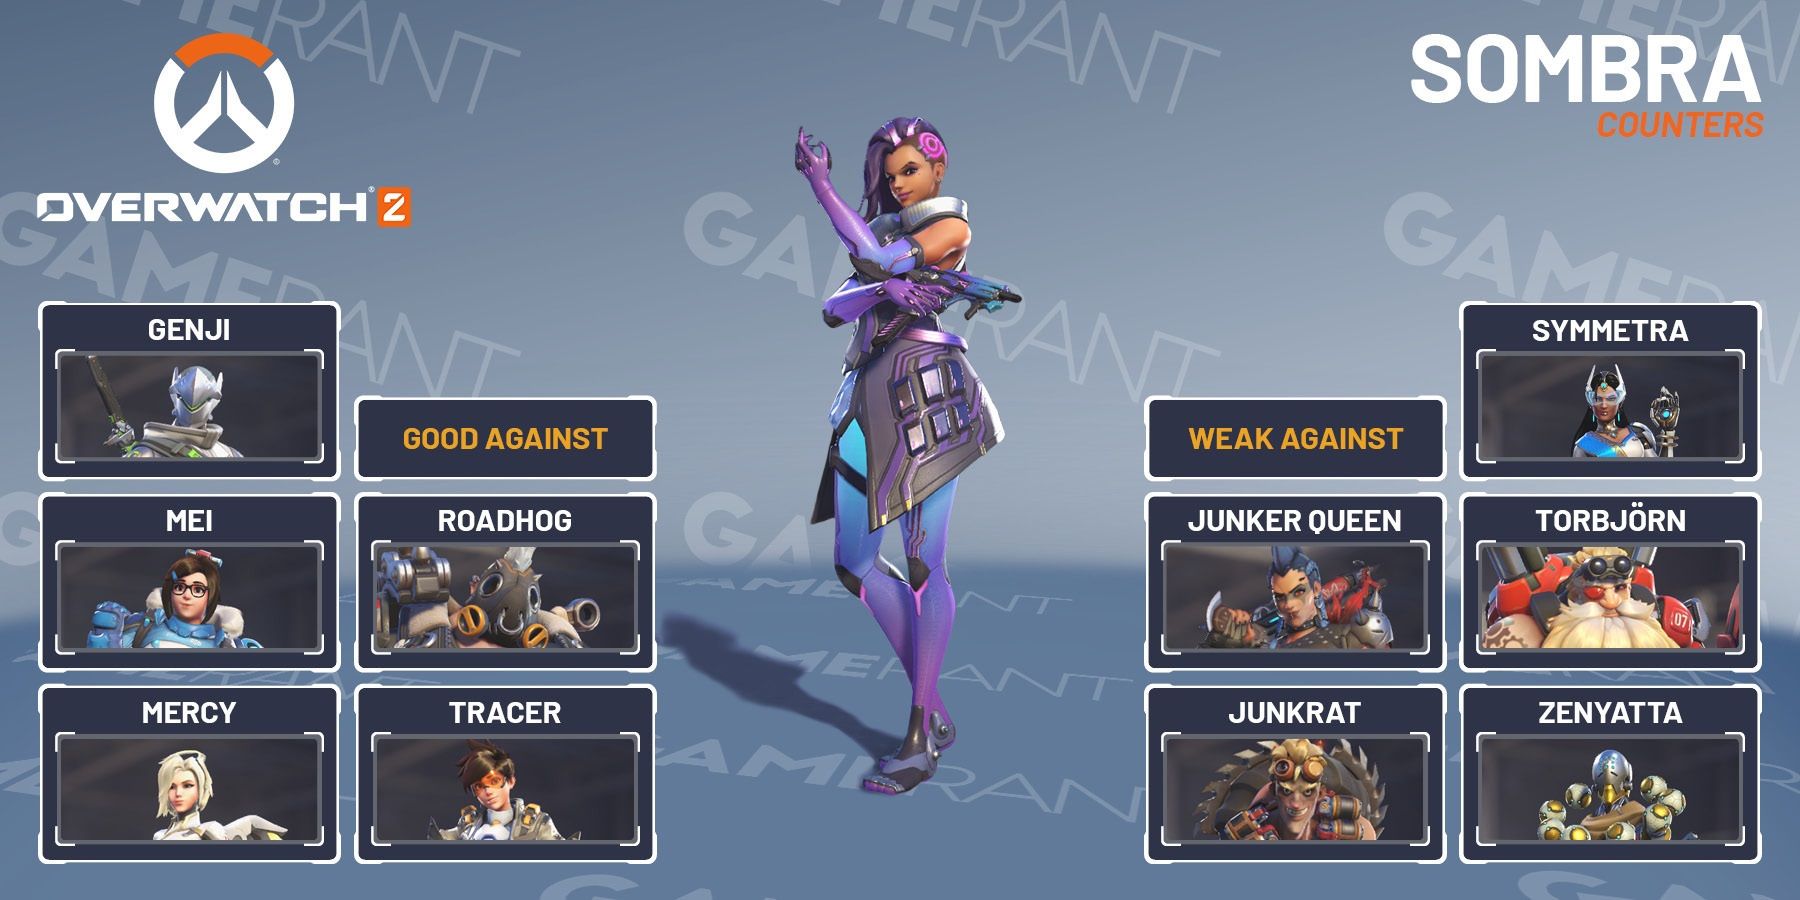 Overwatch 2 Sombra Strength And Weakness